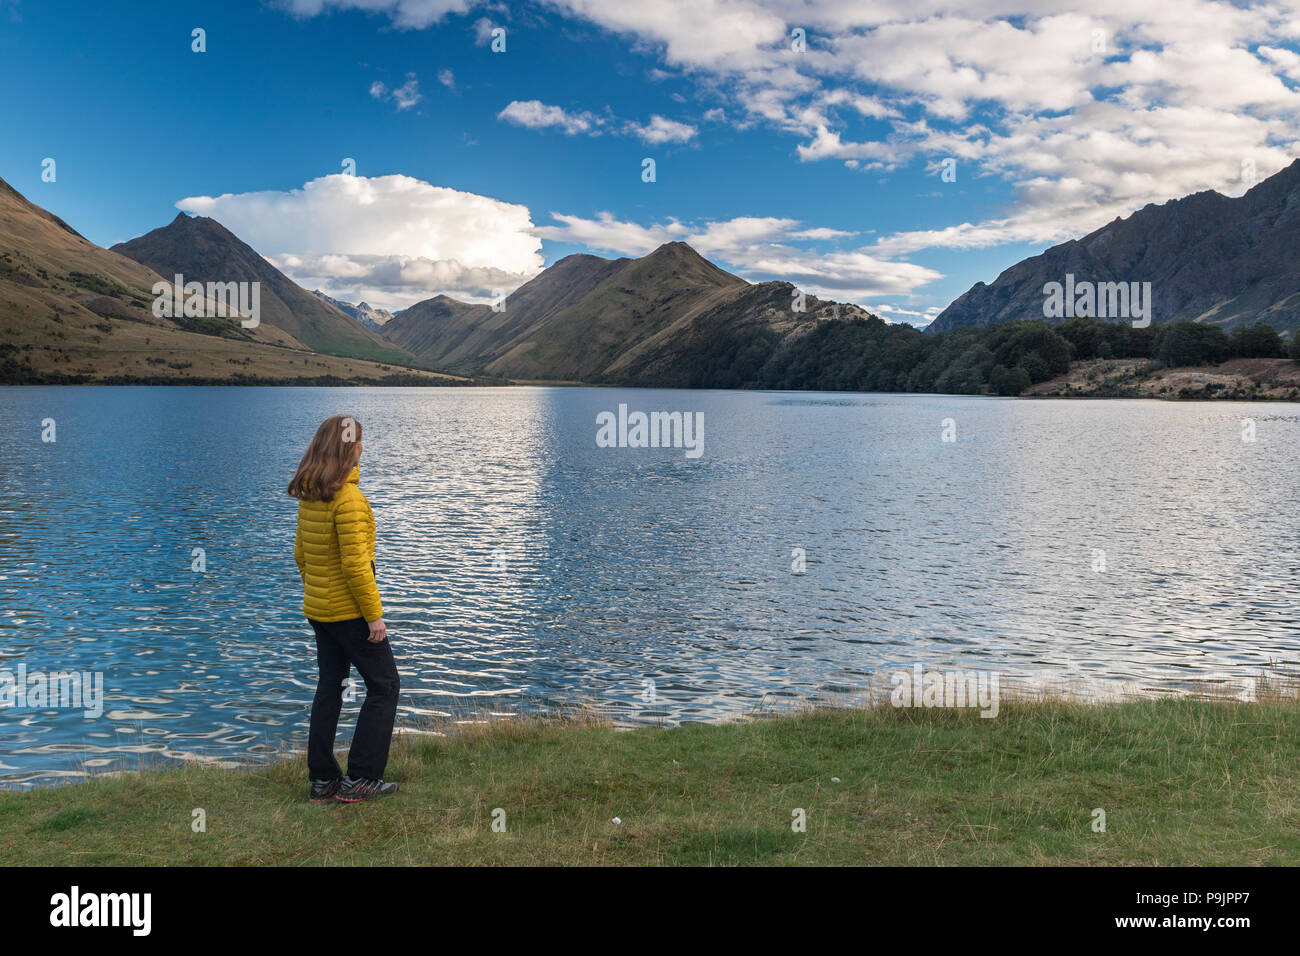 Female hiker standing on the shore of Moke Lake near Queenstown, Lake with mountains, Otago, South Island, New Zealand Stock Photo